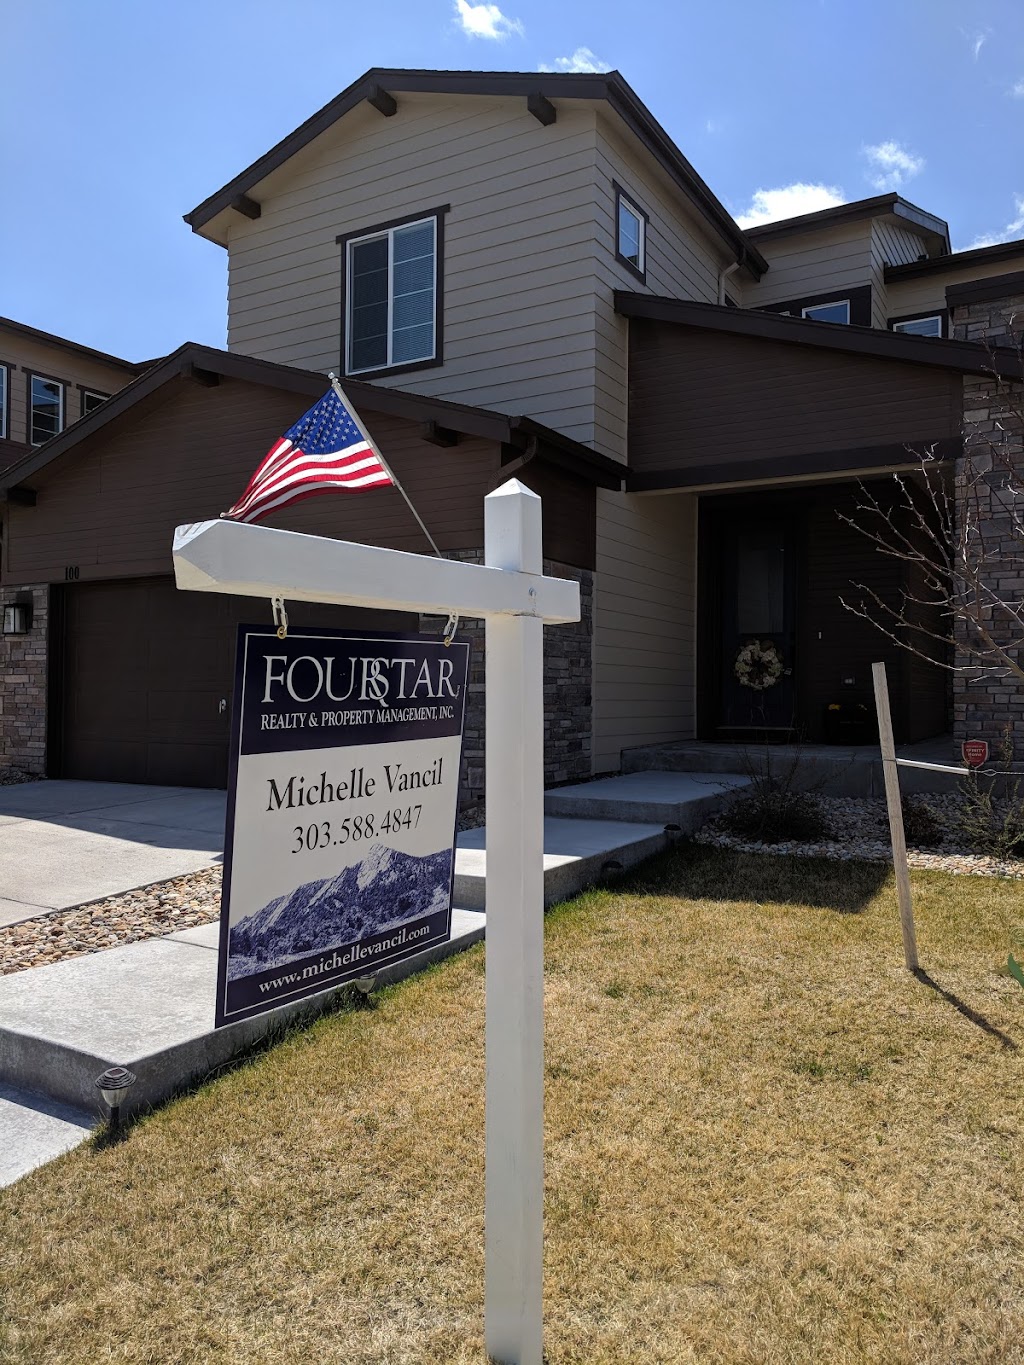 Michelle Vancil - Realtor at Live West Realty | 4497, 1932 Pearl St STE 200, Boulder, CO 80302, USA | Phone: (303) 588-4847